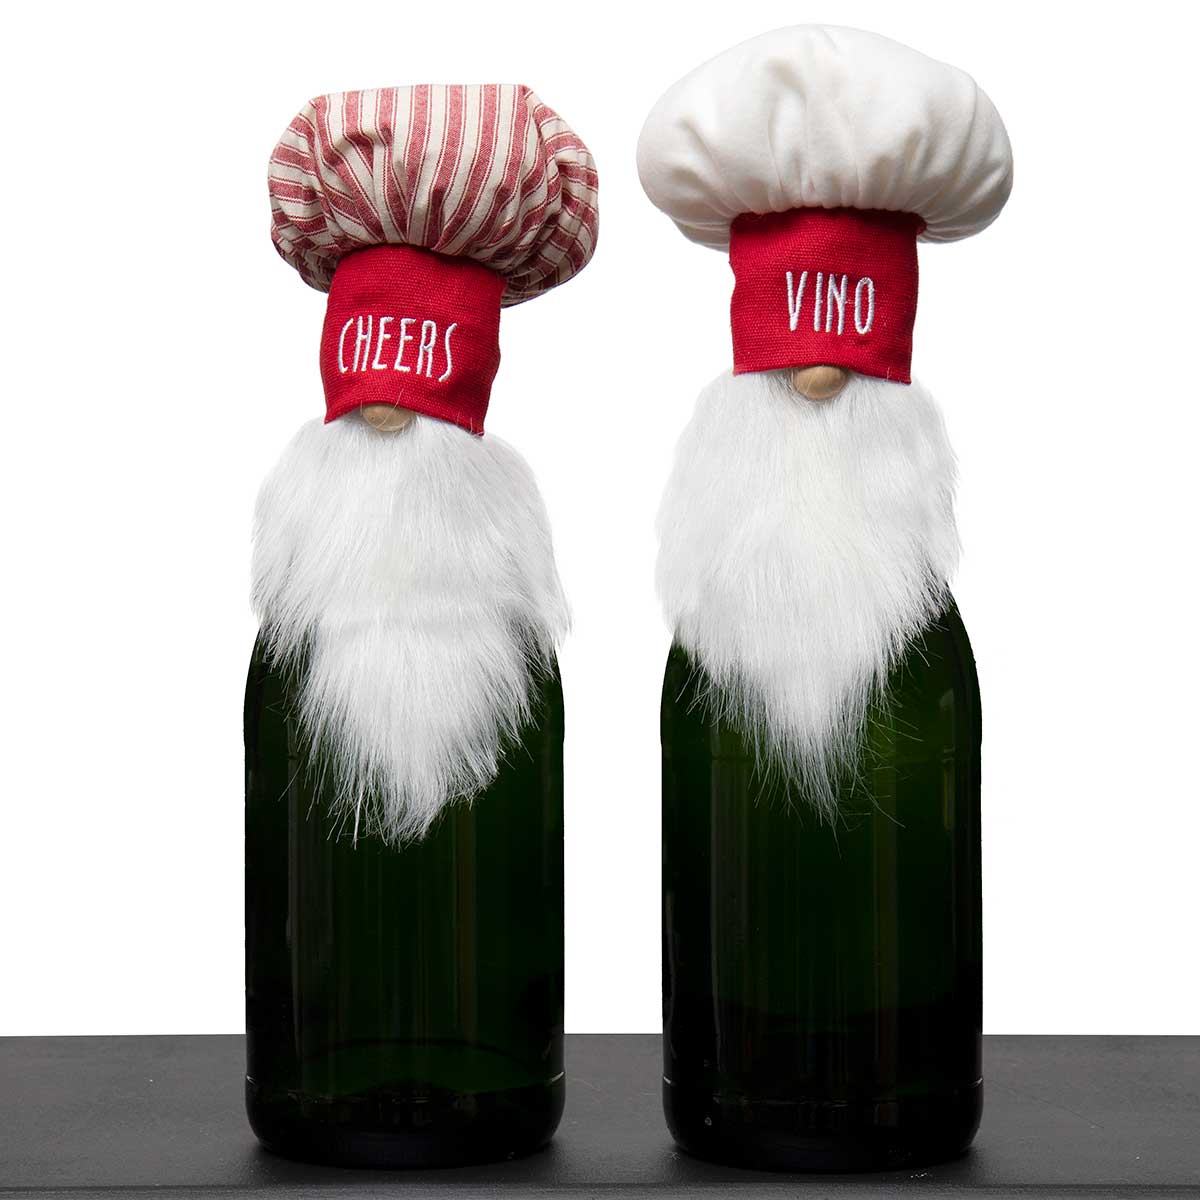 !Cheers/Vino Gnome Bottle Topper with Wood Nose 10"